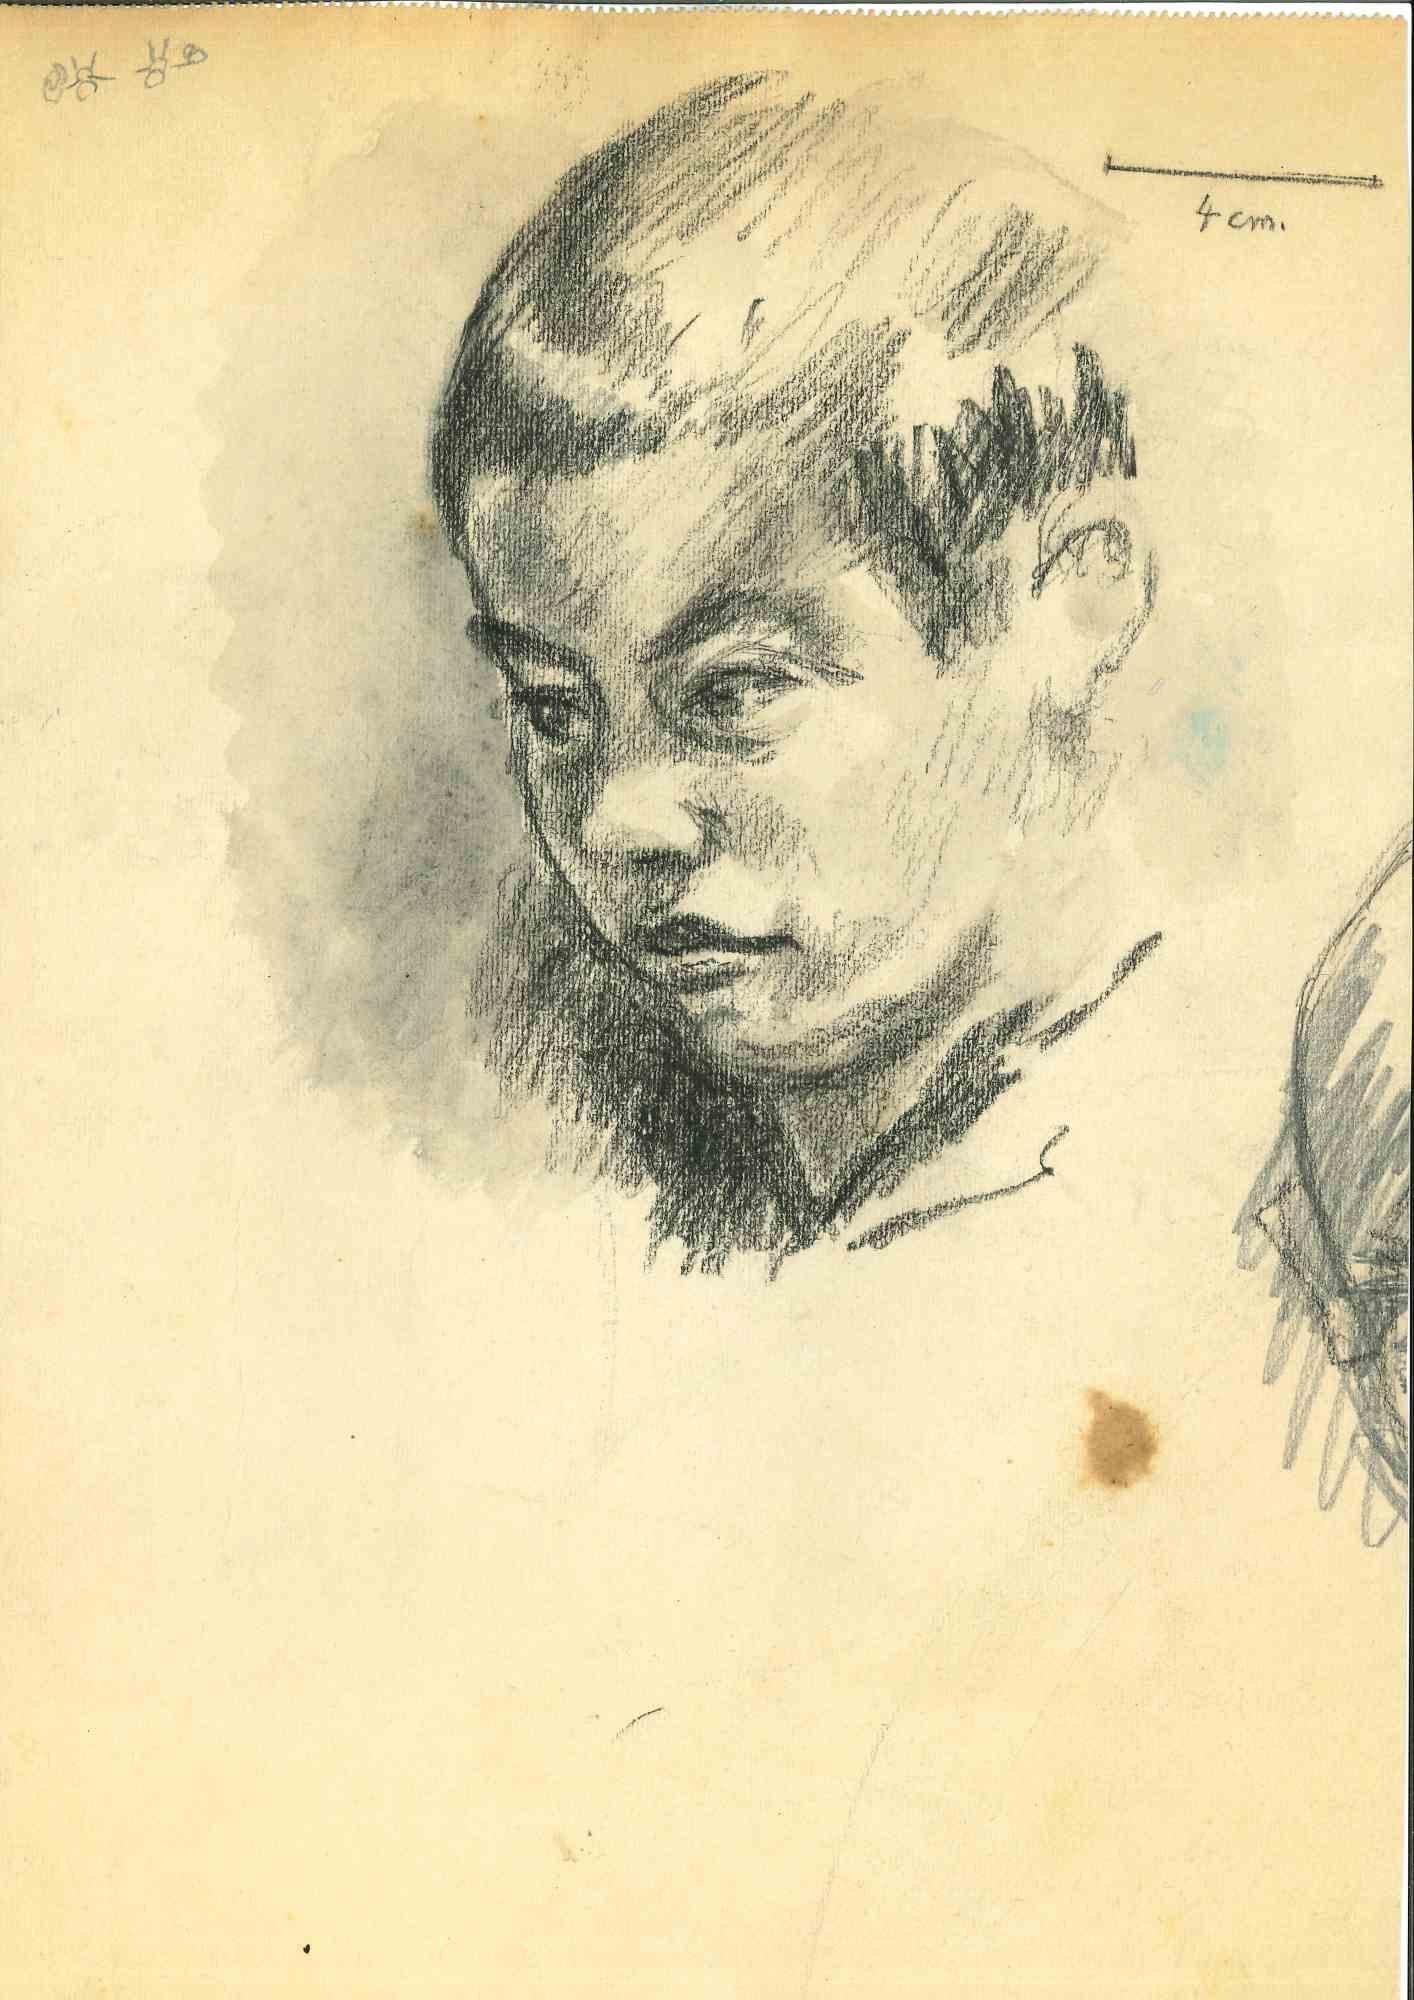 The Portrait Of A Boy is an Original Drawing in pencil on creamy-colored paper realized by Mino Maccari in the mid-20th century.

Hand-signed by the artist on the lower on the rear.

With another portrait drawing on the rear.

Good conditions with